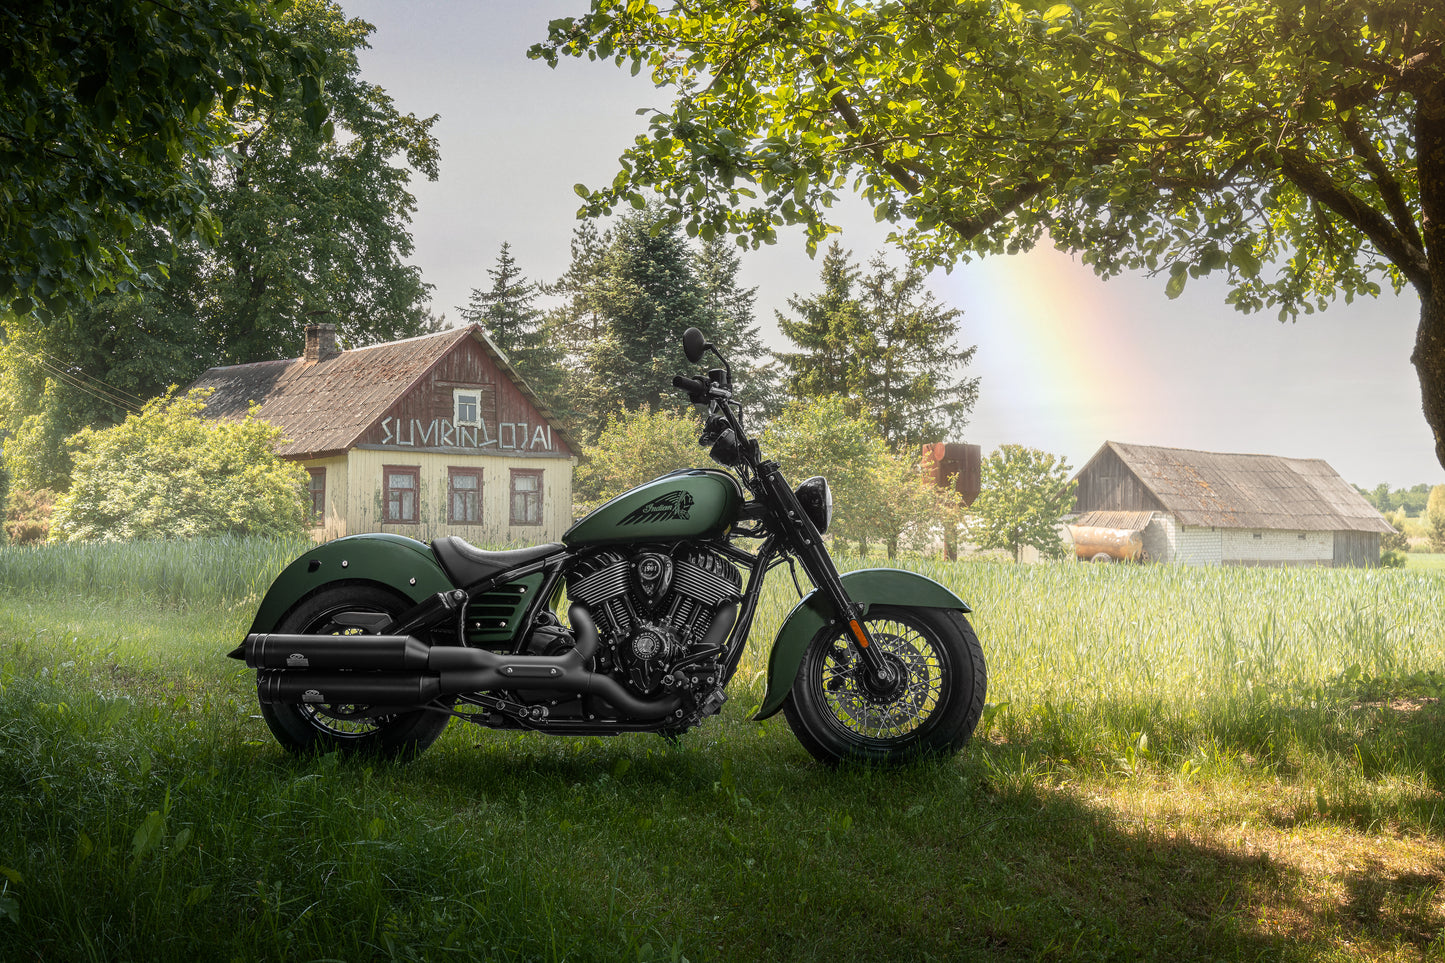 Harley Davidson motorcycle with Killer Custom "Apache" front fender from the side in the countryside on a sunny day